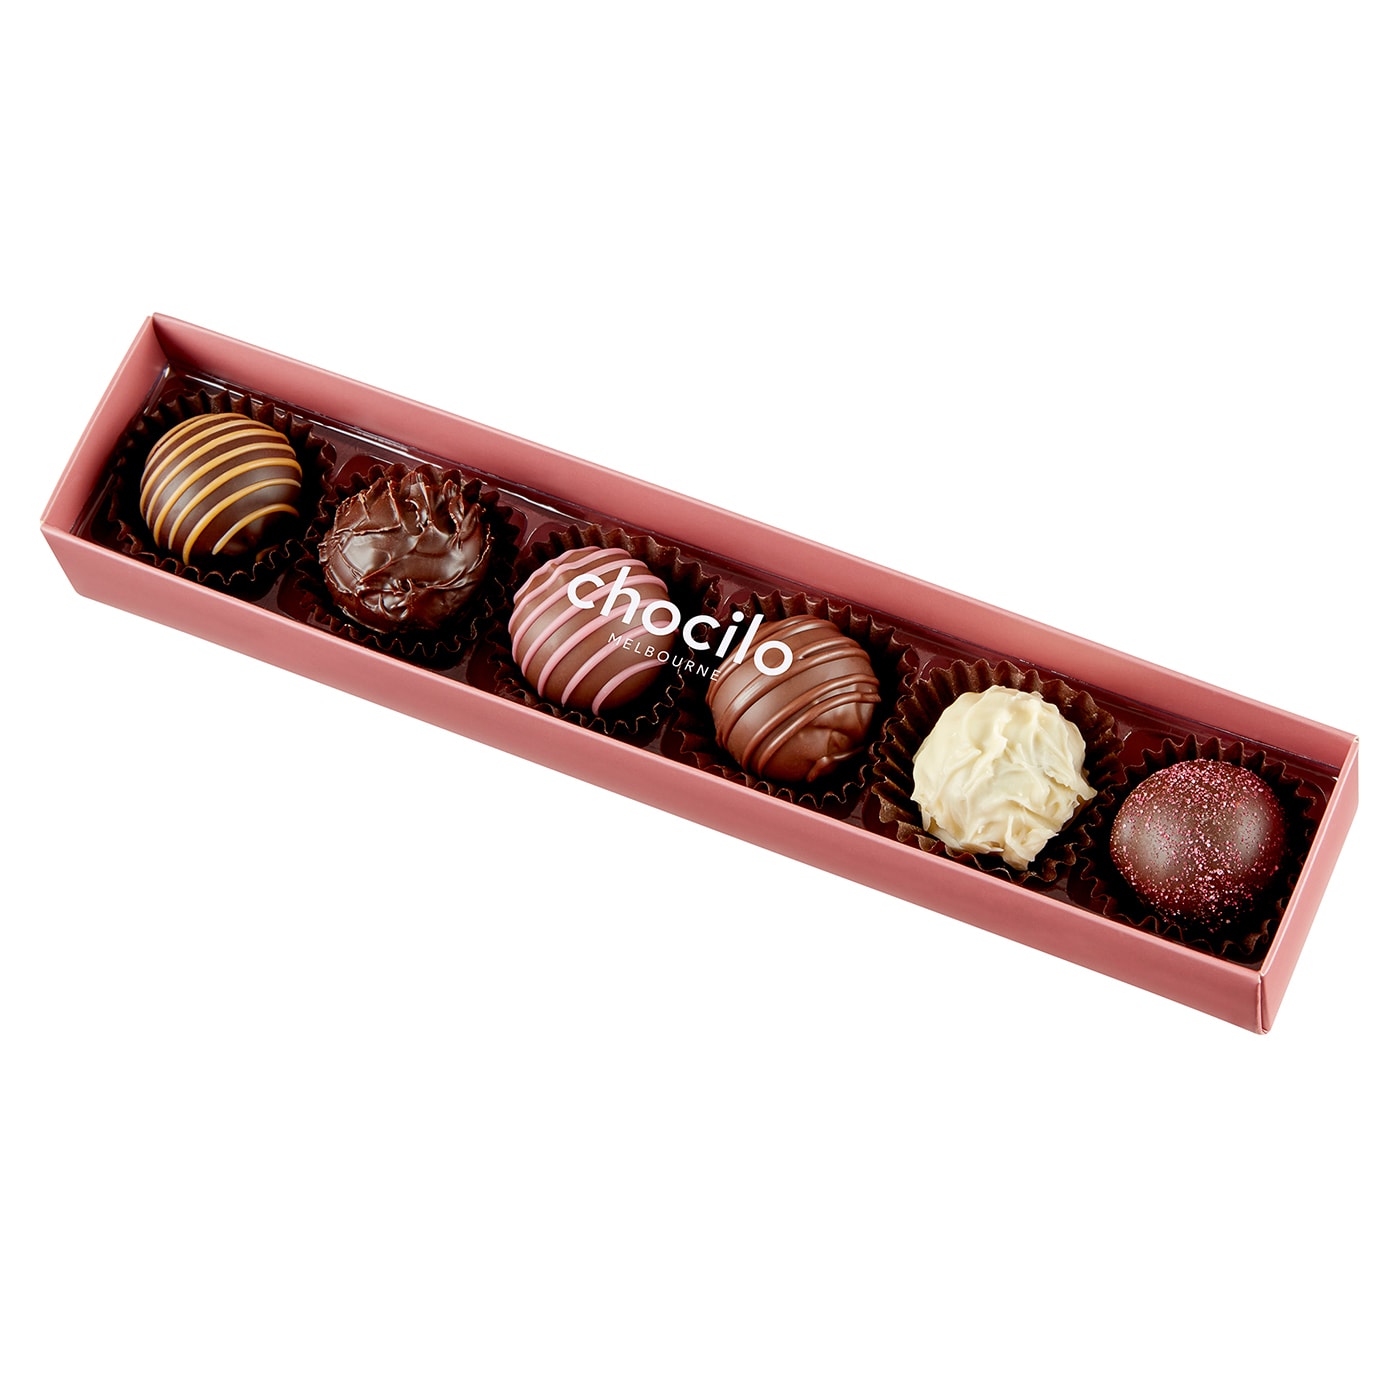 Chocilo Melbourne premium assorted chocolate truffles in a dusty pink gift box